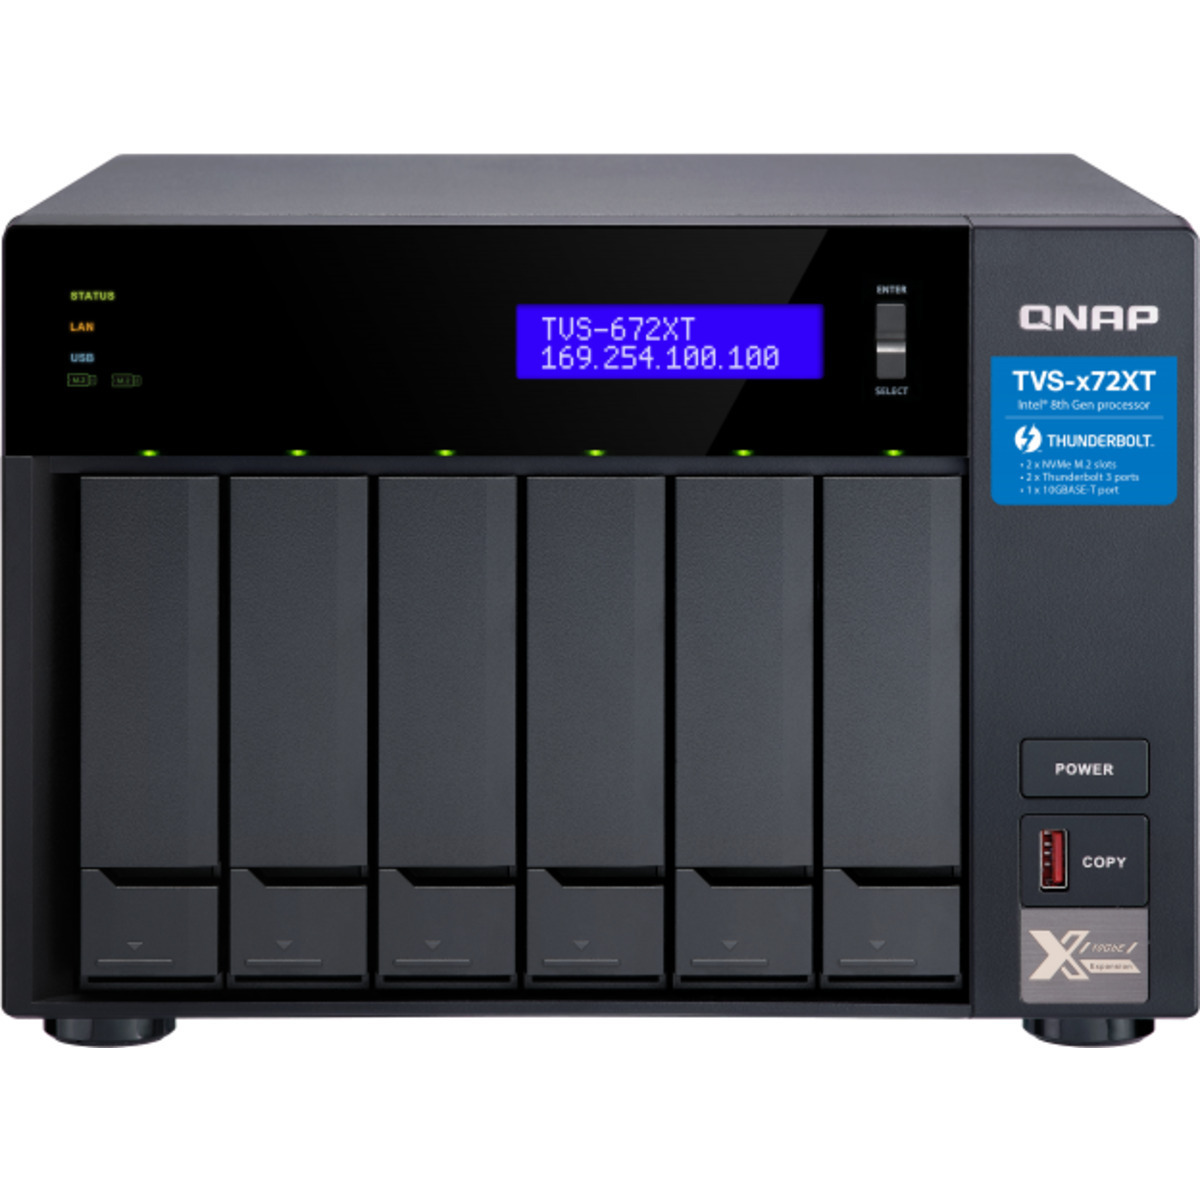 QNAP TVS-672XT Thunderbolt 3 60tb 6-Bay Desktop Multimedia / Power User / Business DAS-NAS - Combo Direct + Network Storage Device 5x12tb Seagate IronWolf ST12000VN0008 3.5 7200rpm SATA 6Gb/s HDD NAS Class Drives Installed - Burn-In Tested TVS-672XT Thunderbolt 3